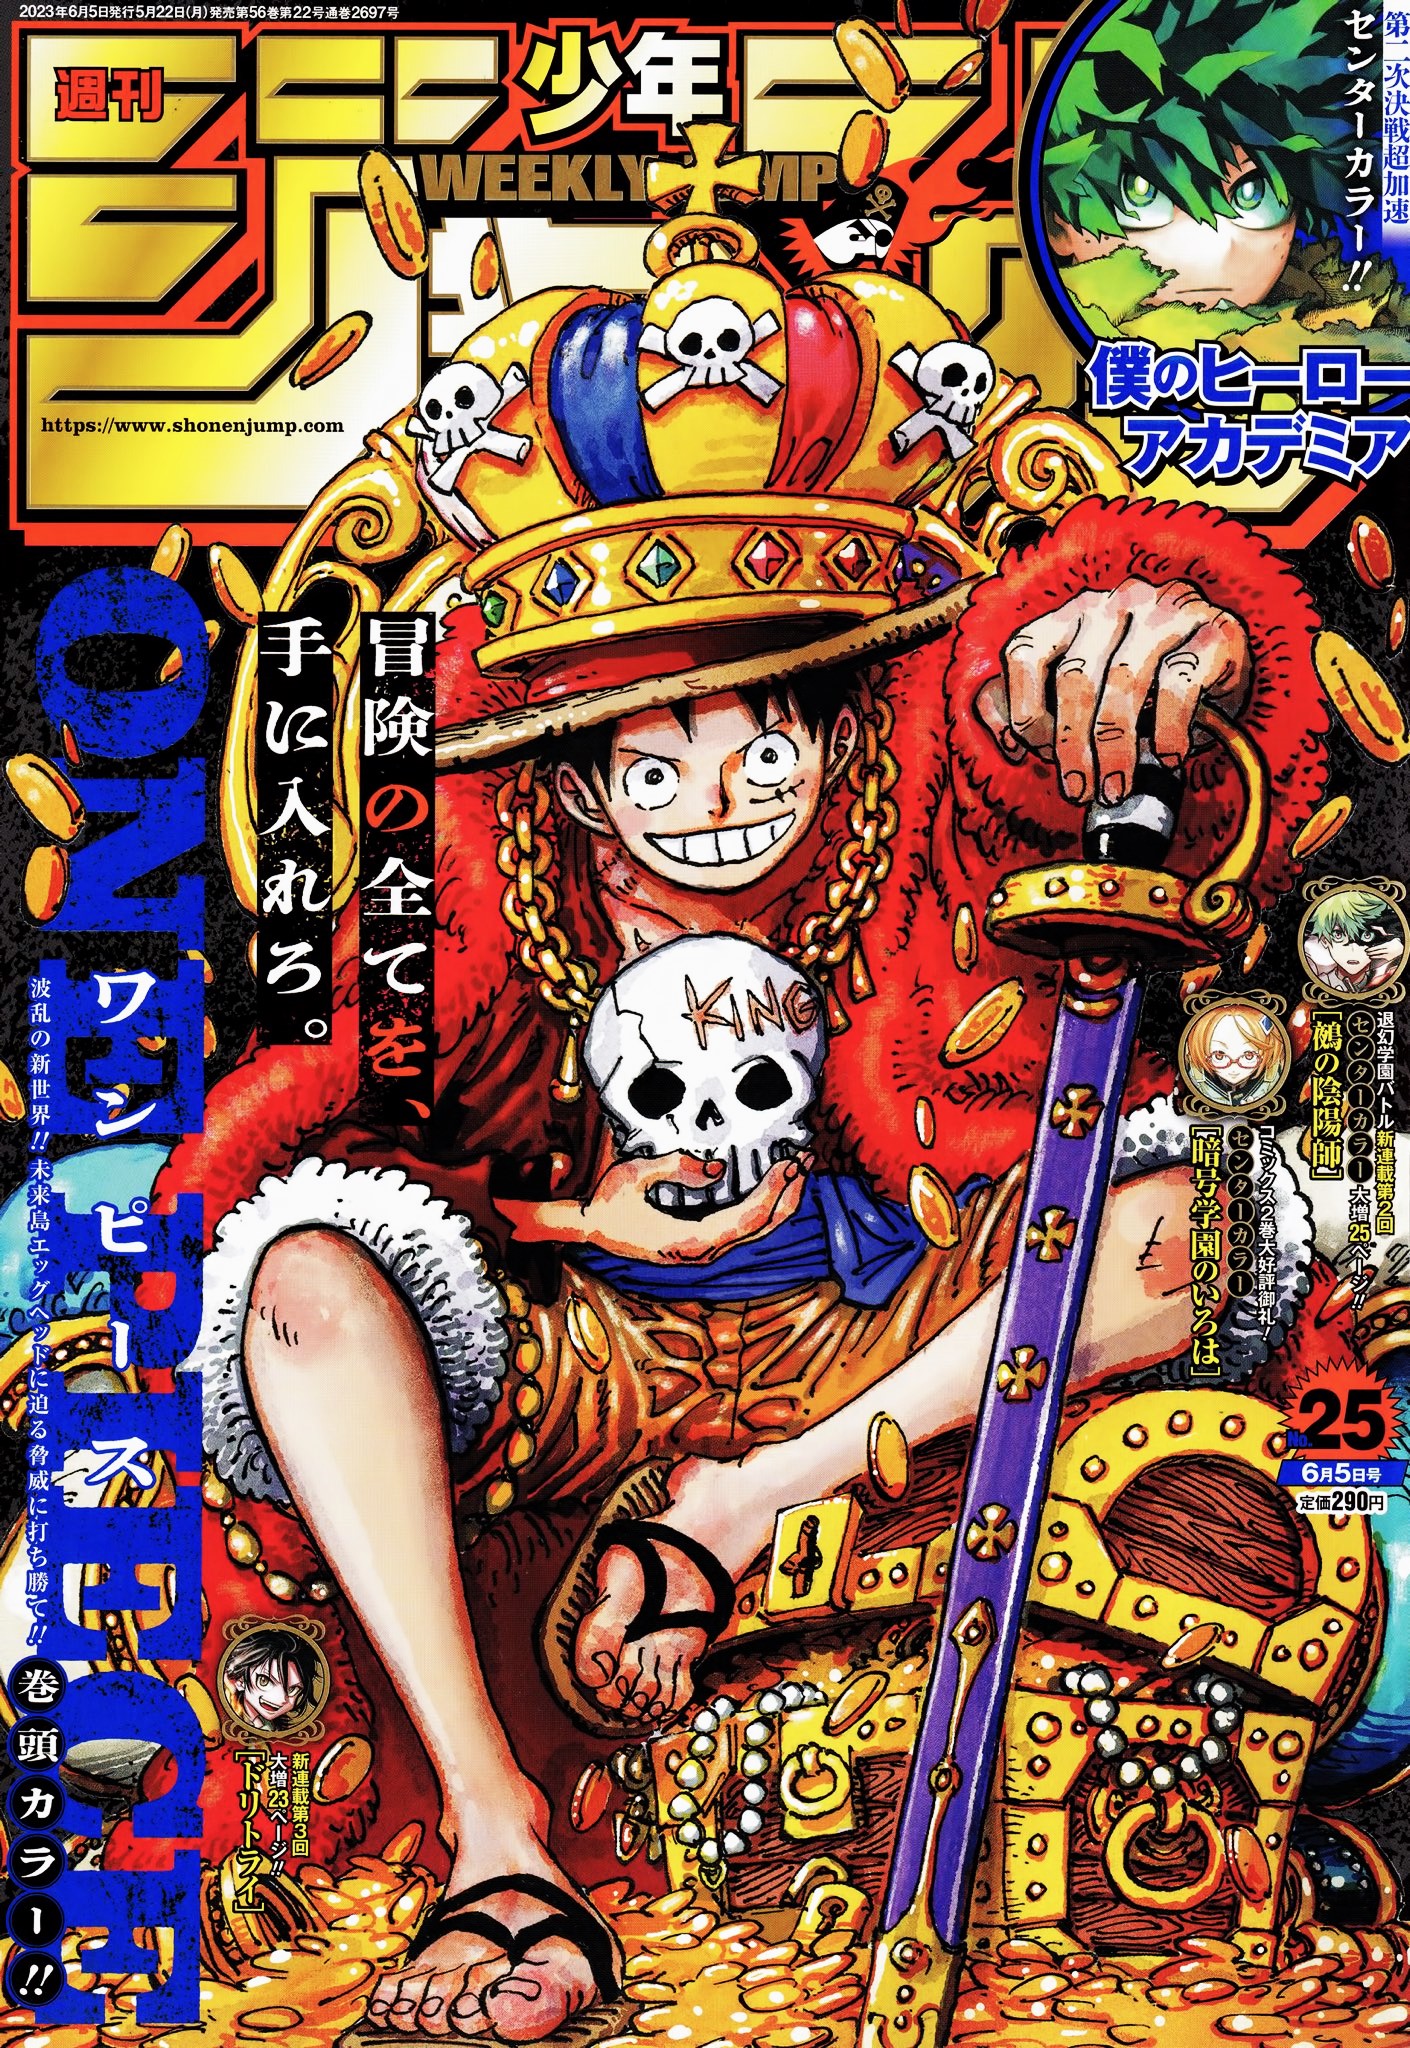 An Audience With The World King! One Piece Chapter 1,084 BREAKDOWN